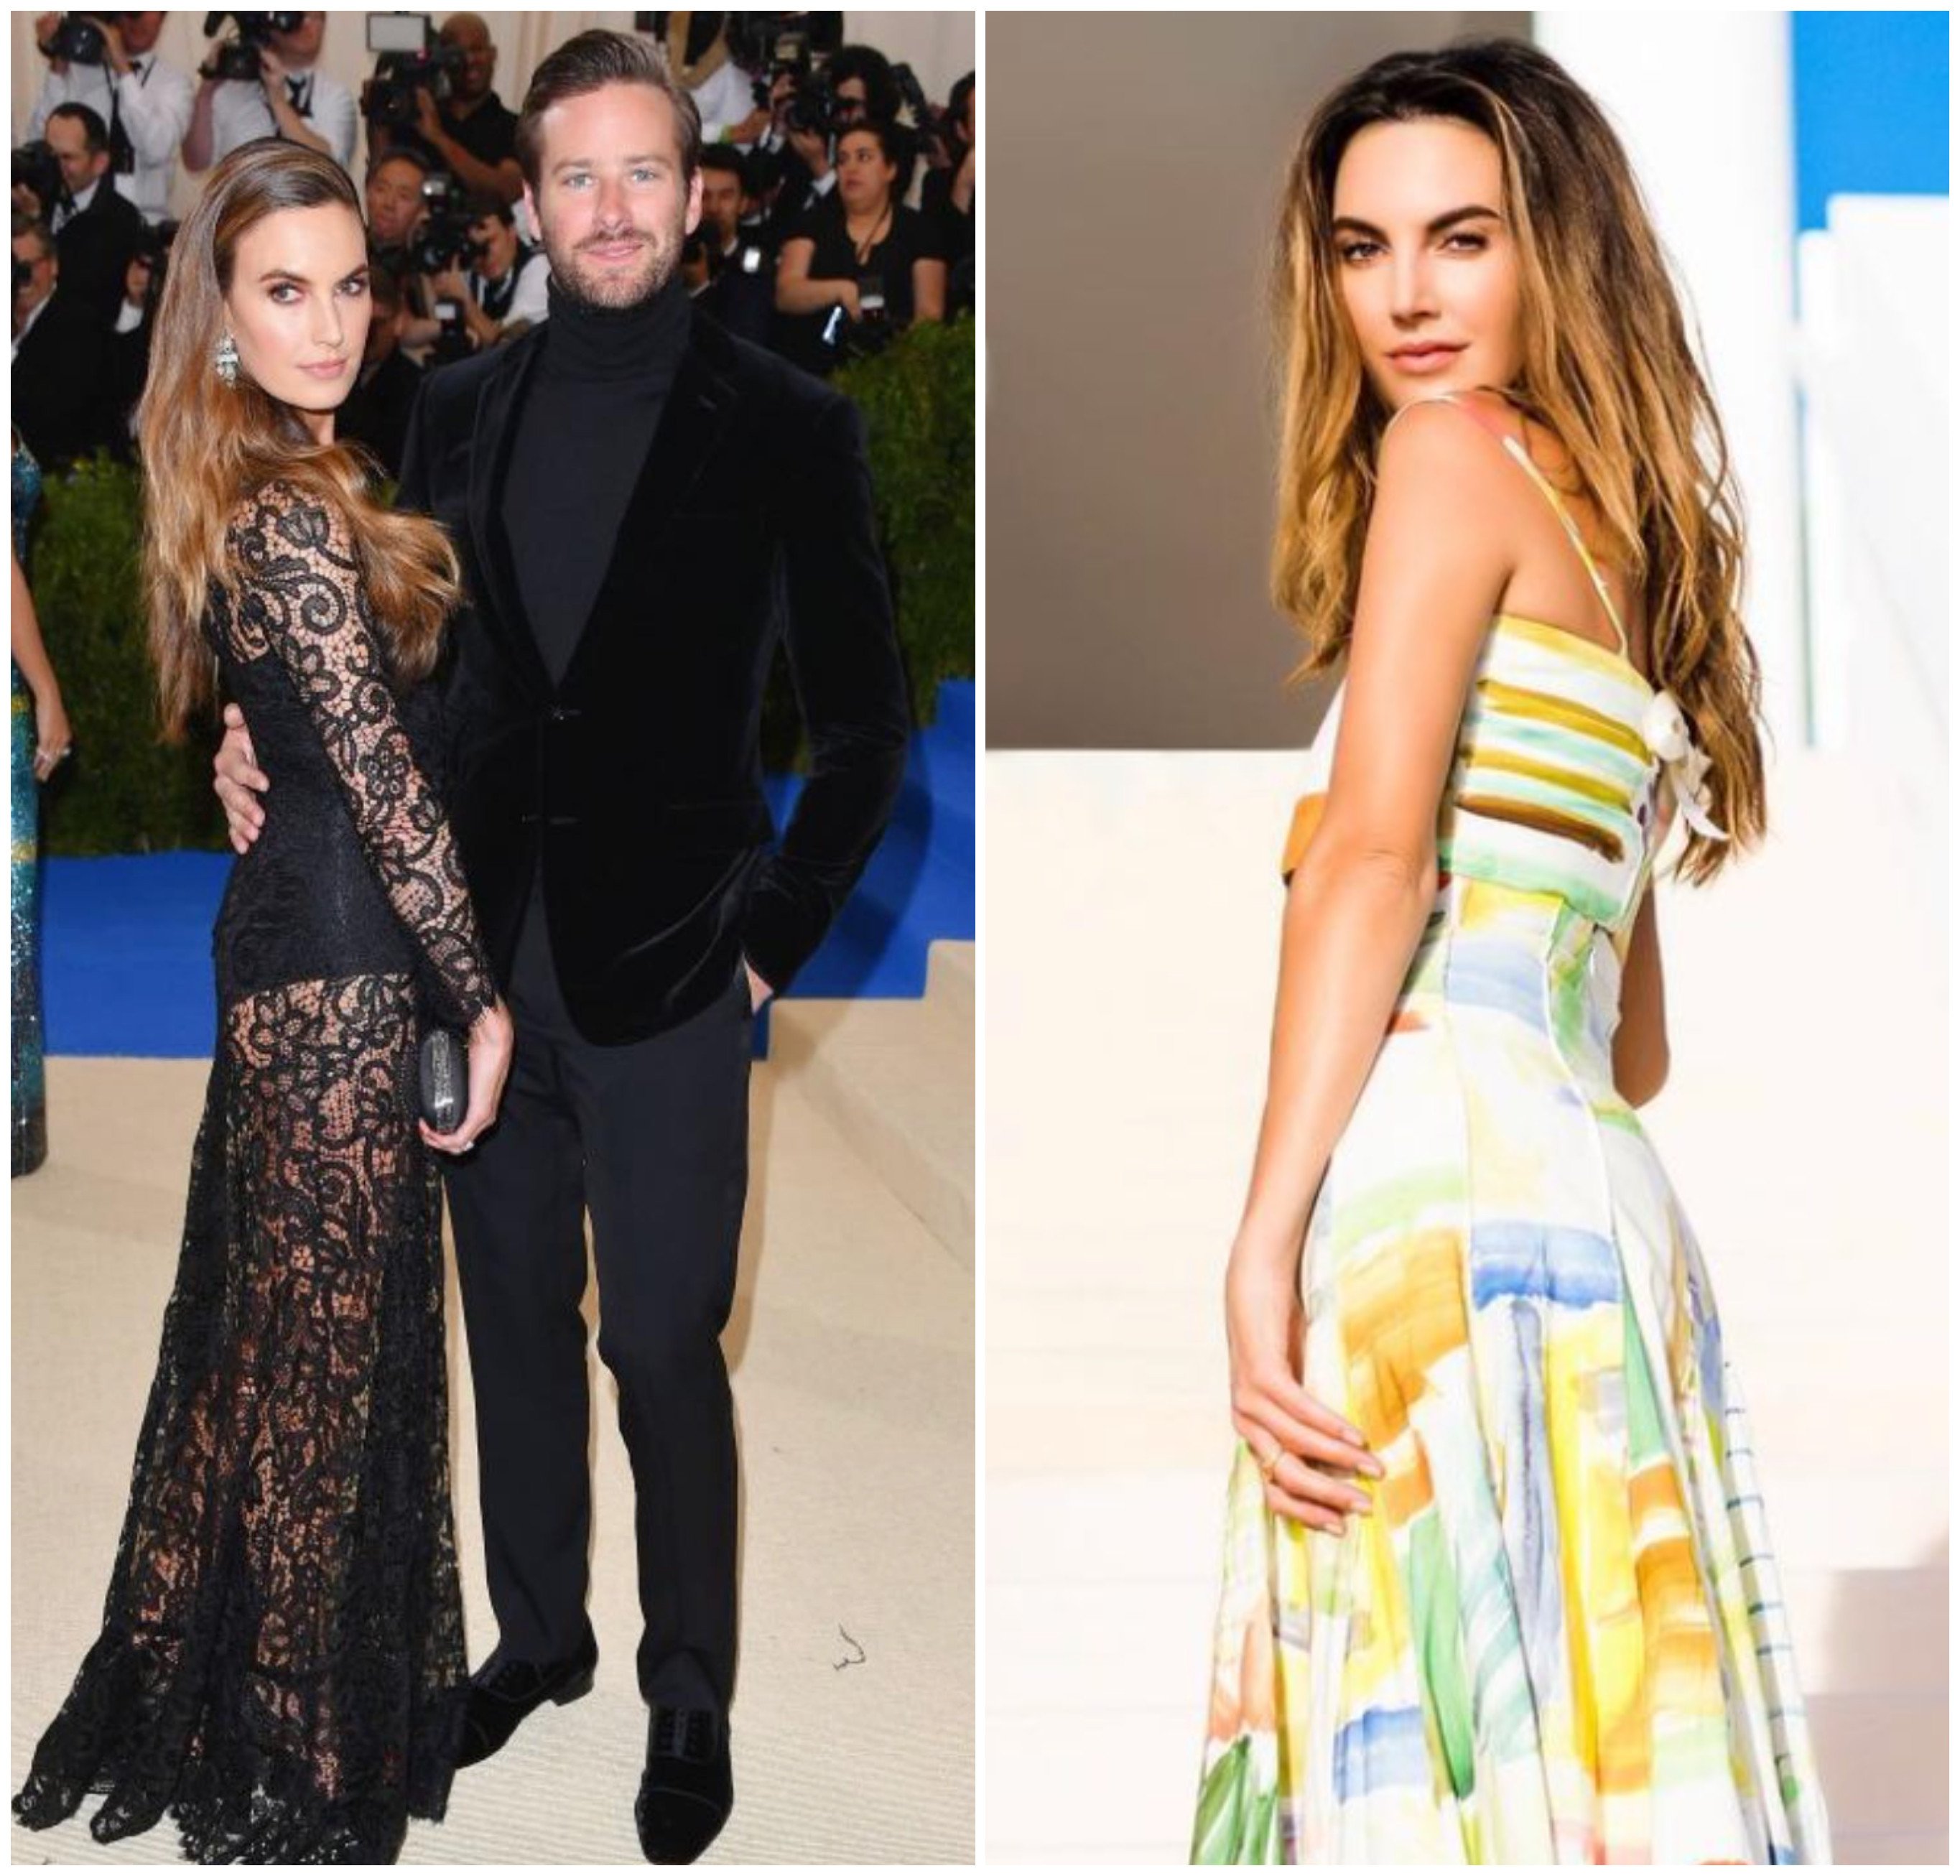 What has Elizabeth Chambers, star of new reality TV show Grand Cayman: Secrets in Paradise, been up to since her split from controversy-ridden actor Armie Hammer? Photos: @elizabethchambers/Instagram